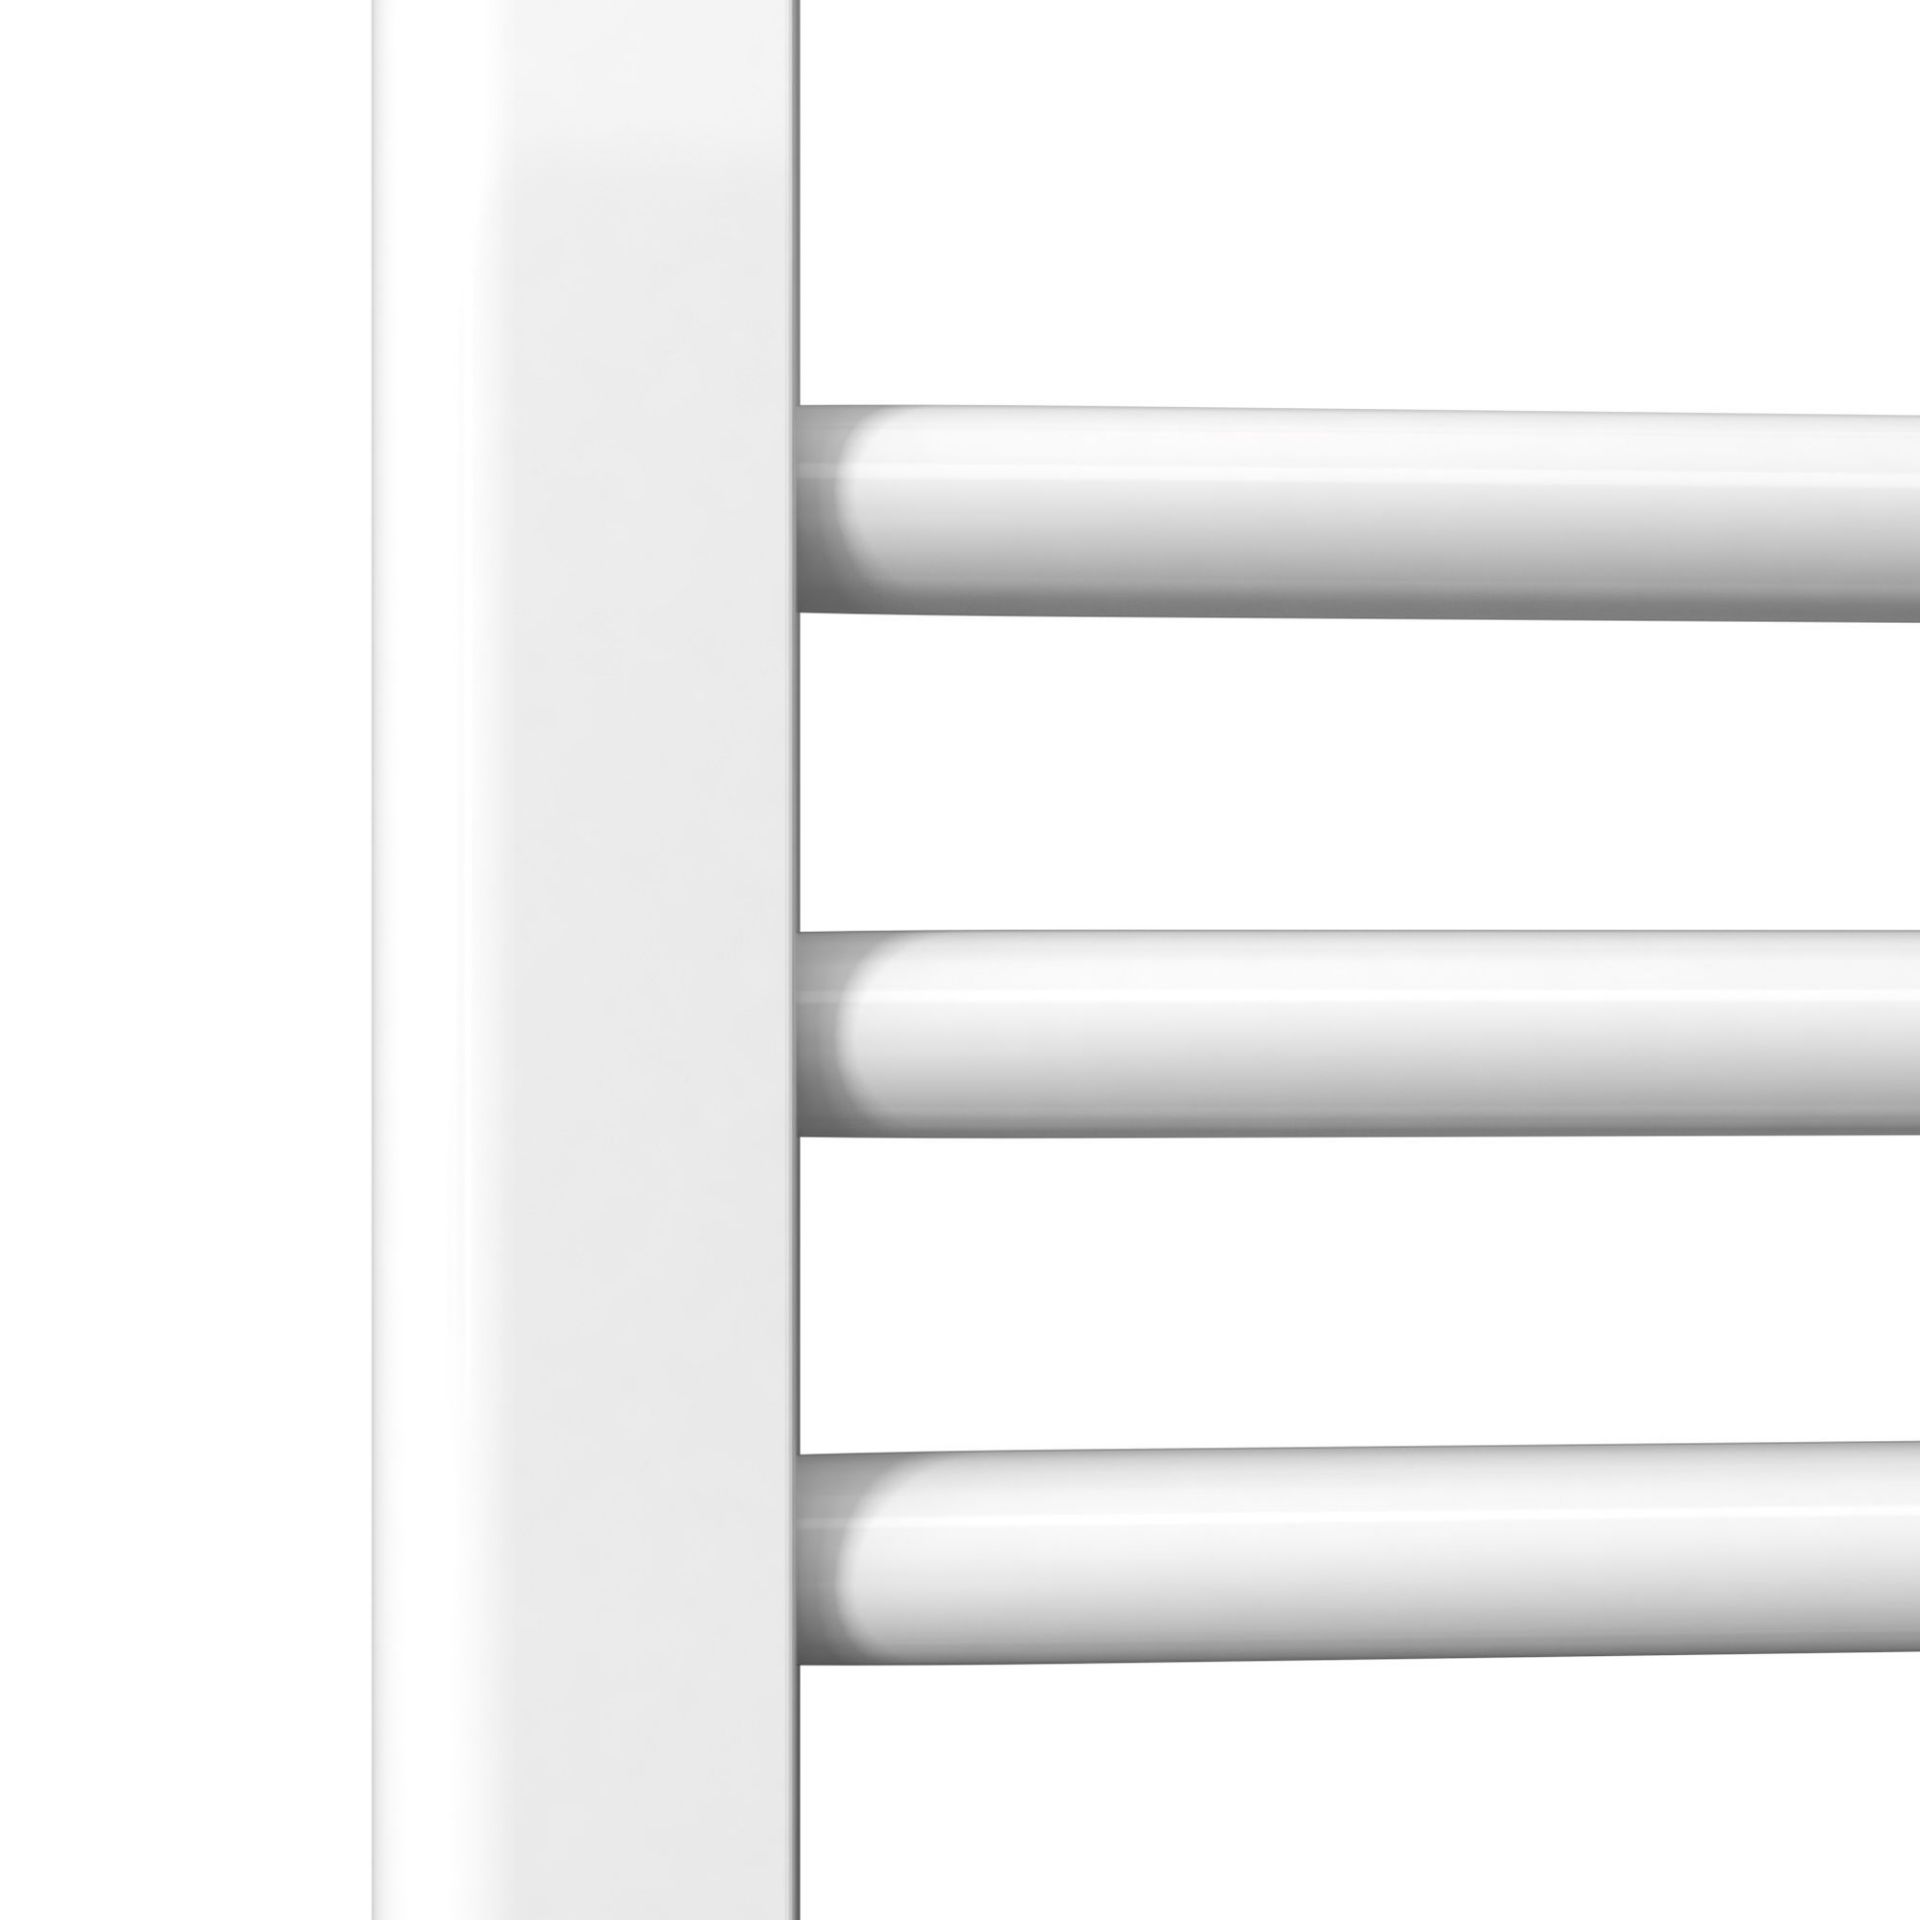 Brand New (HM58) 1200x600mm White Heated Towel Radiator. Made from low carbon steel Finished with a - Image 2 of 3